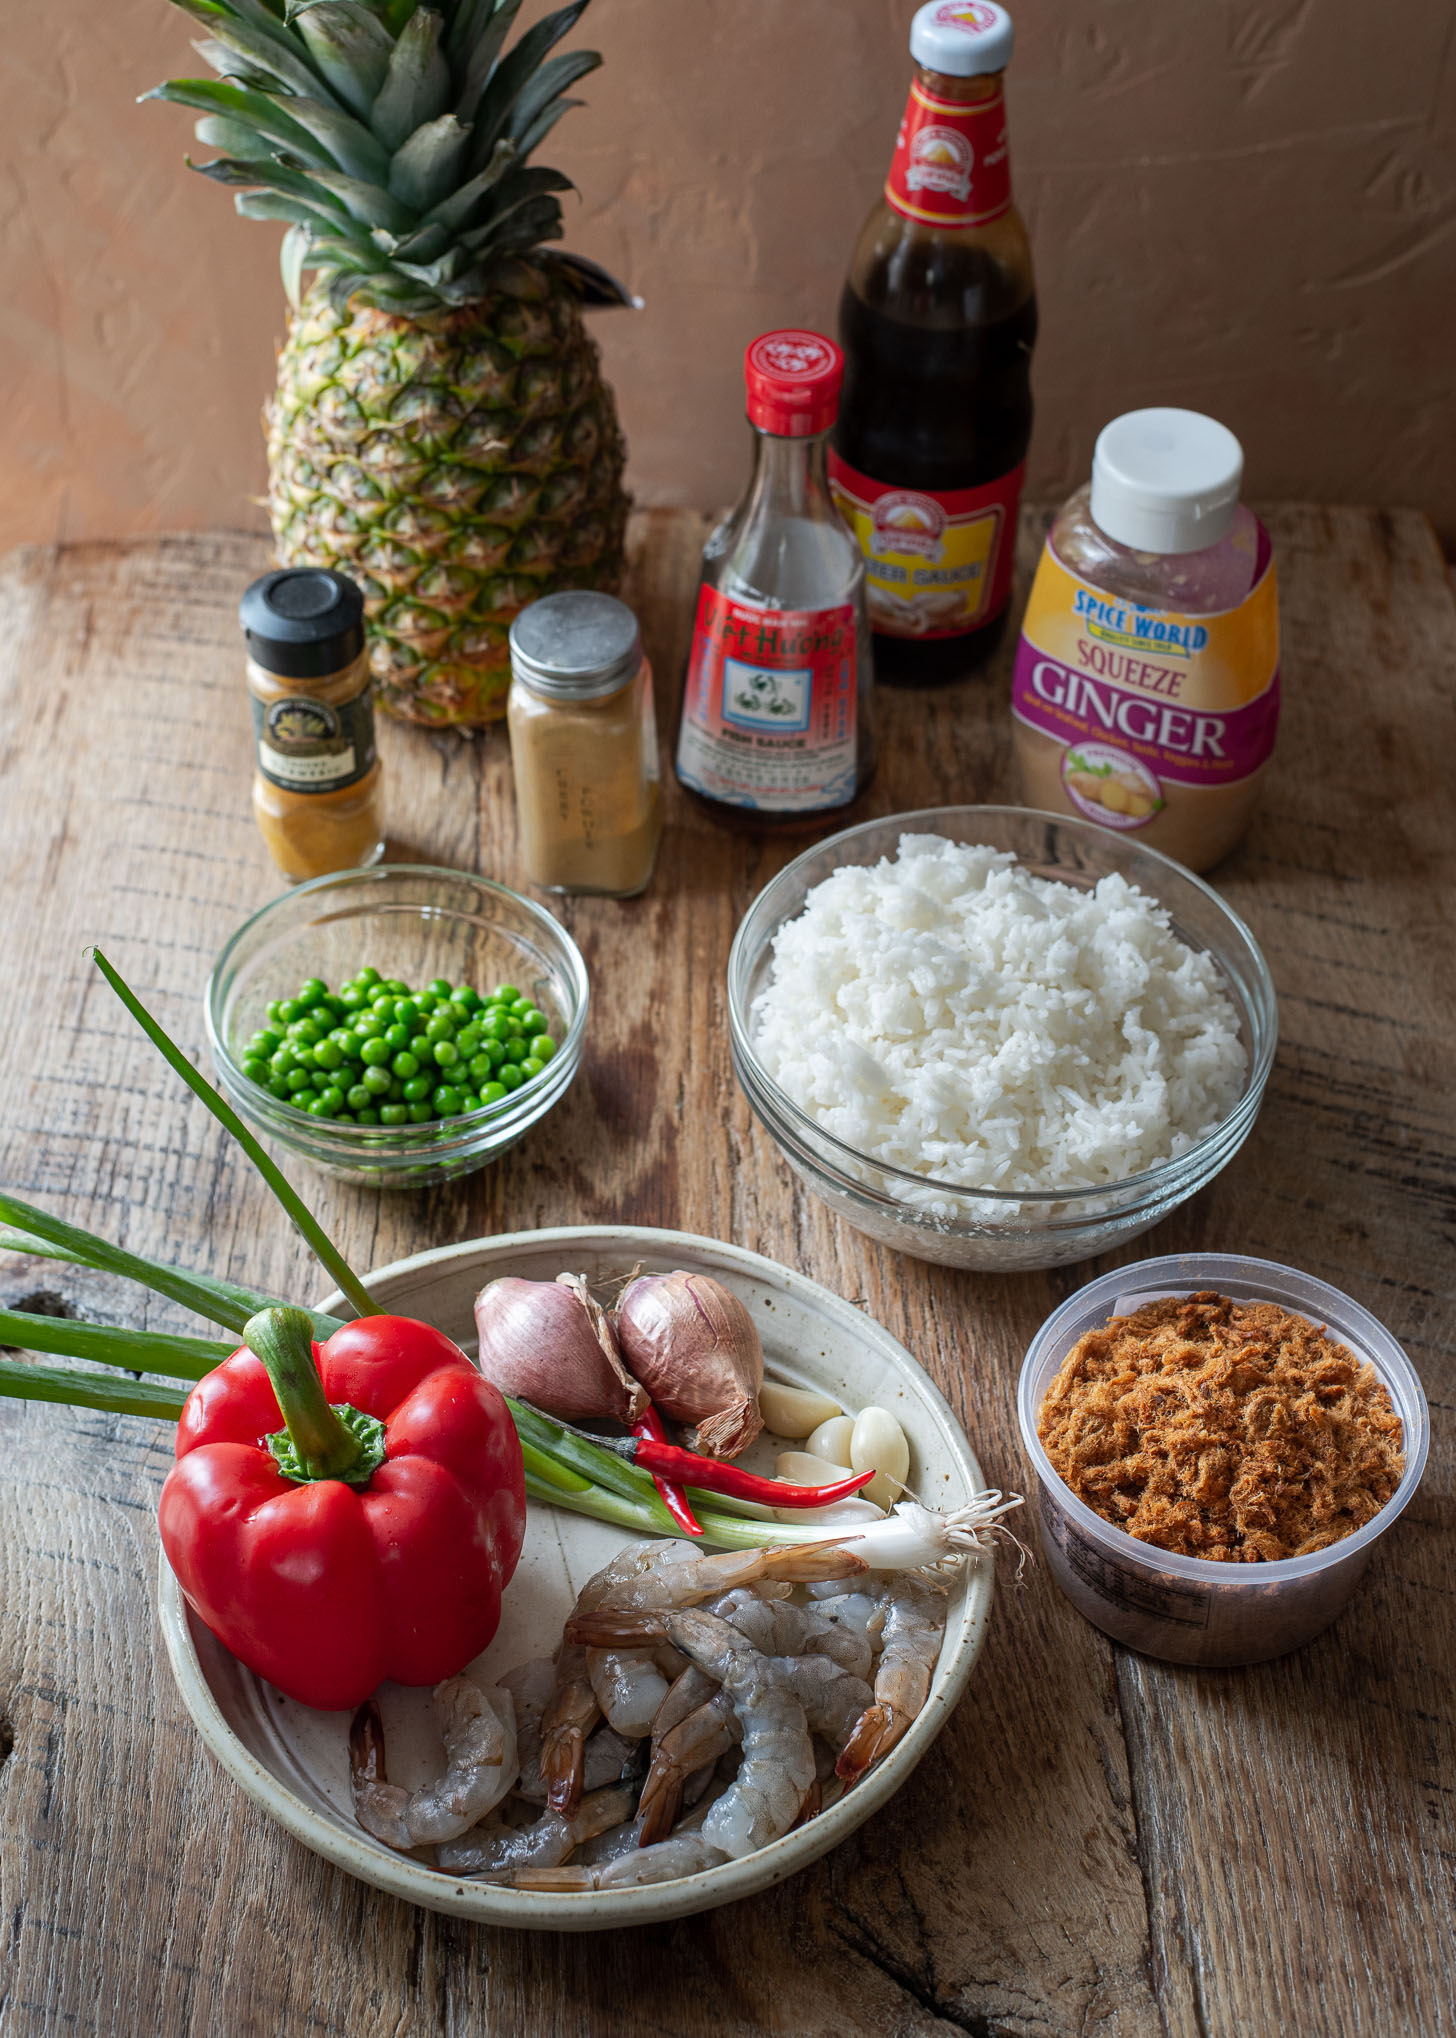 Ingredients for making Thai pineapple fried rice are presented.